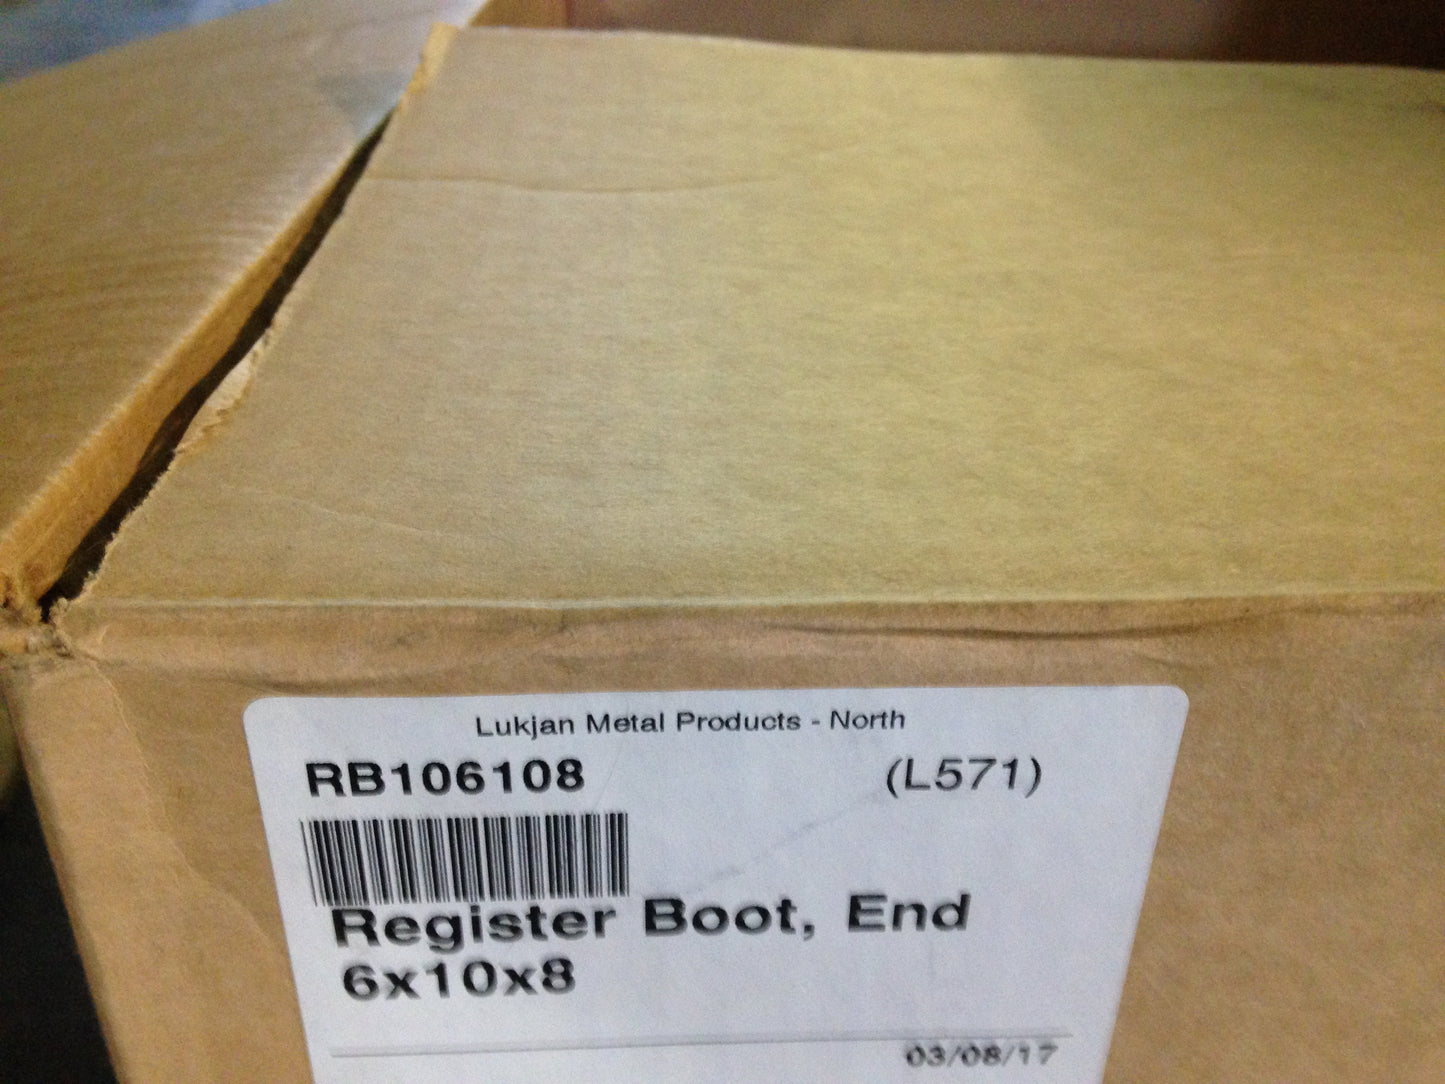 6" X 10" X 8" REGISTER BOOT, END